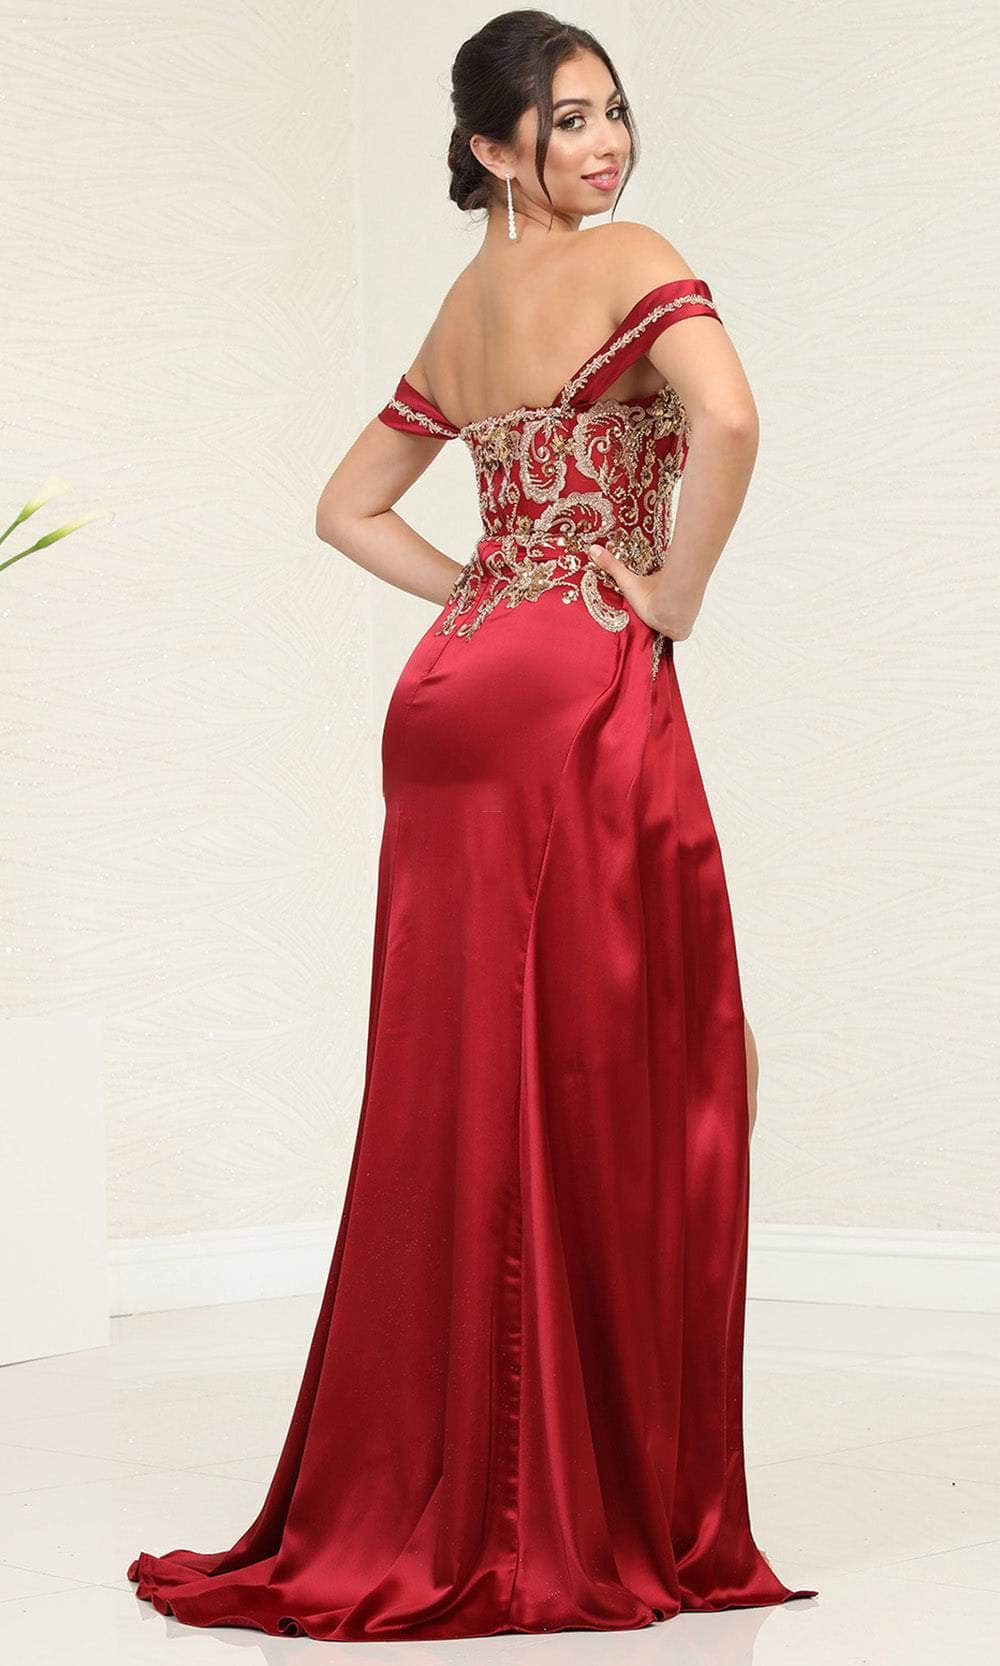 May Queen RQ8055 - Draped Cap Sleeve Prom Gown Evening Dresses